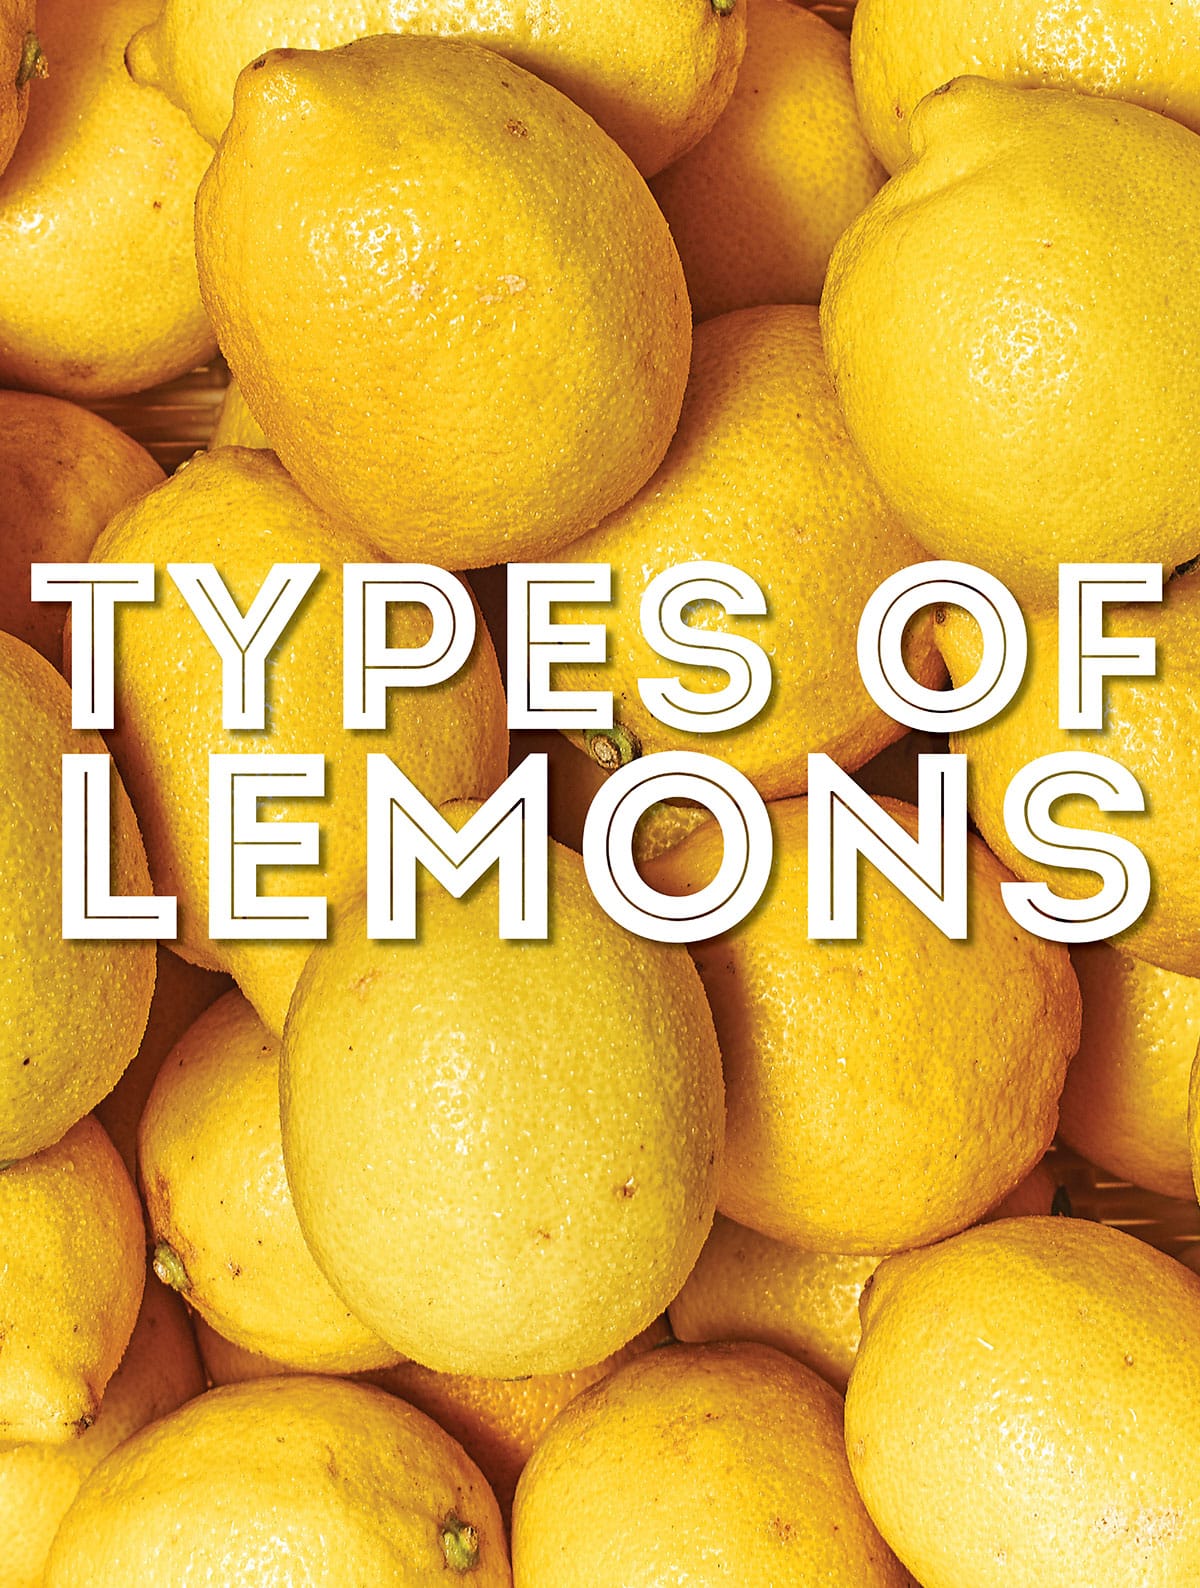 Collage that says "types of lemons".